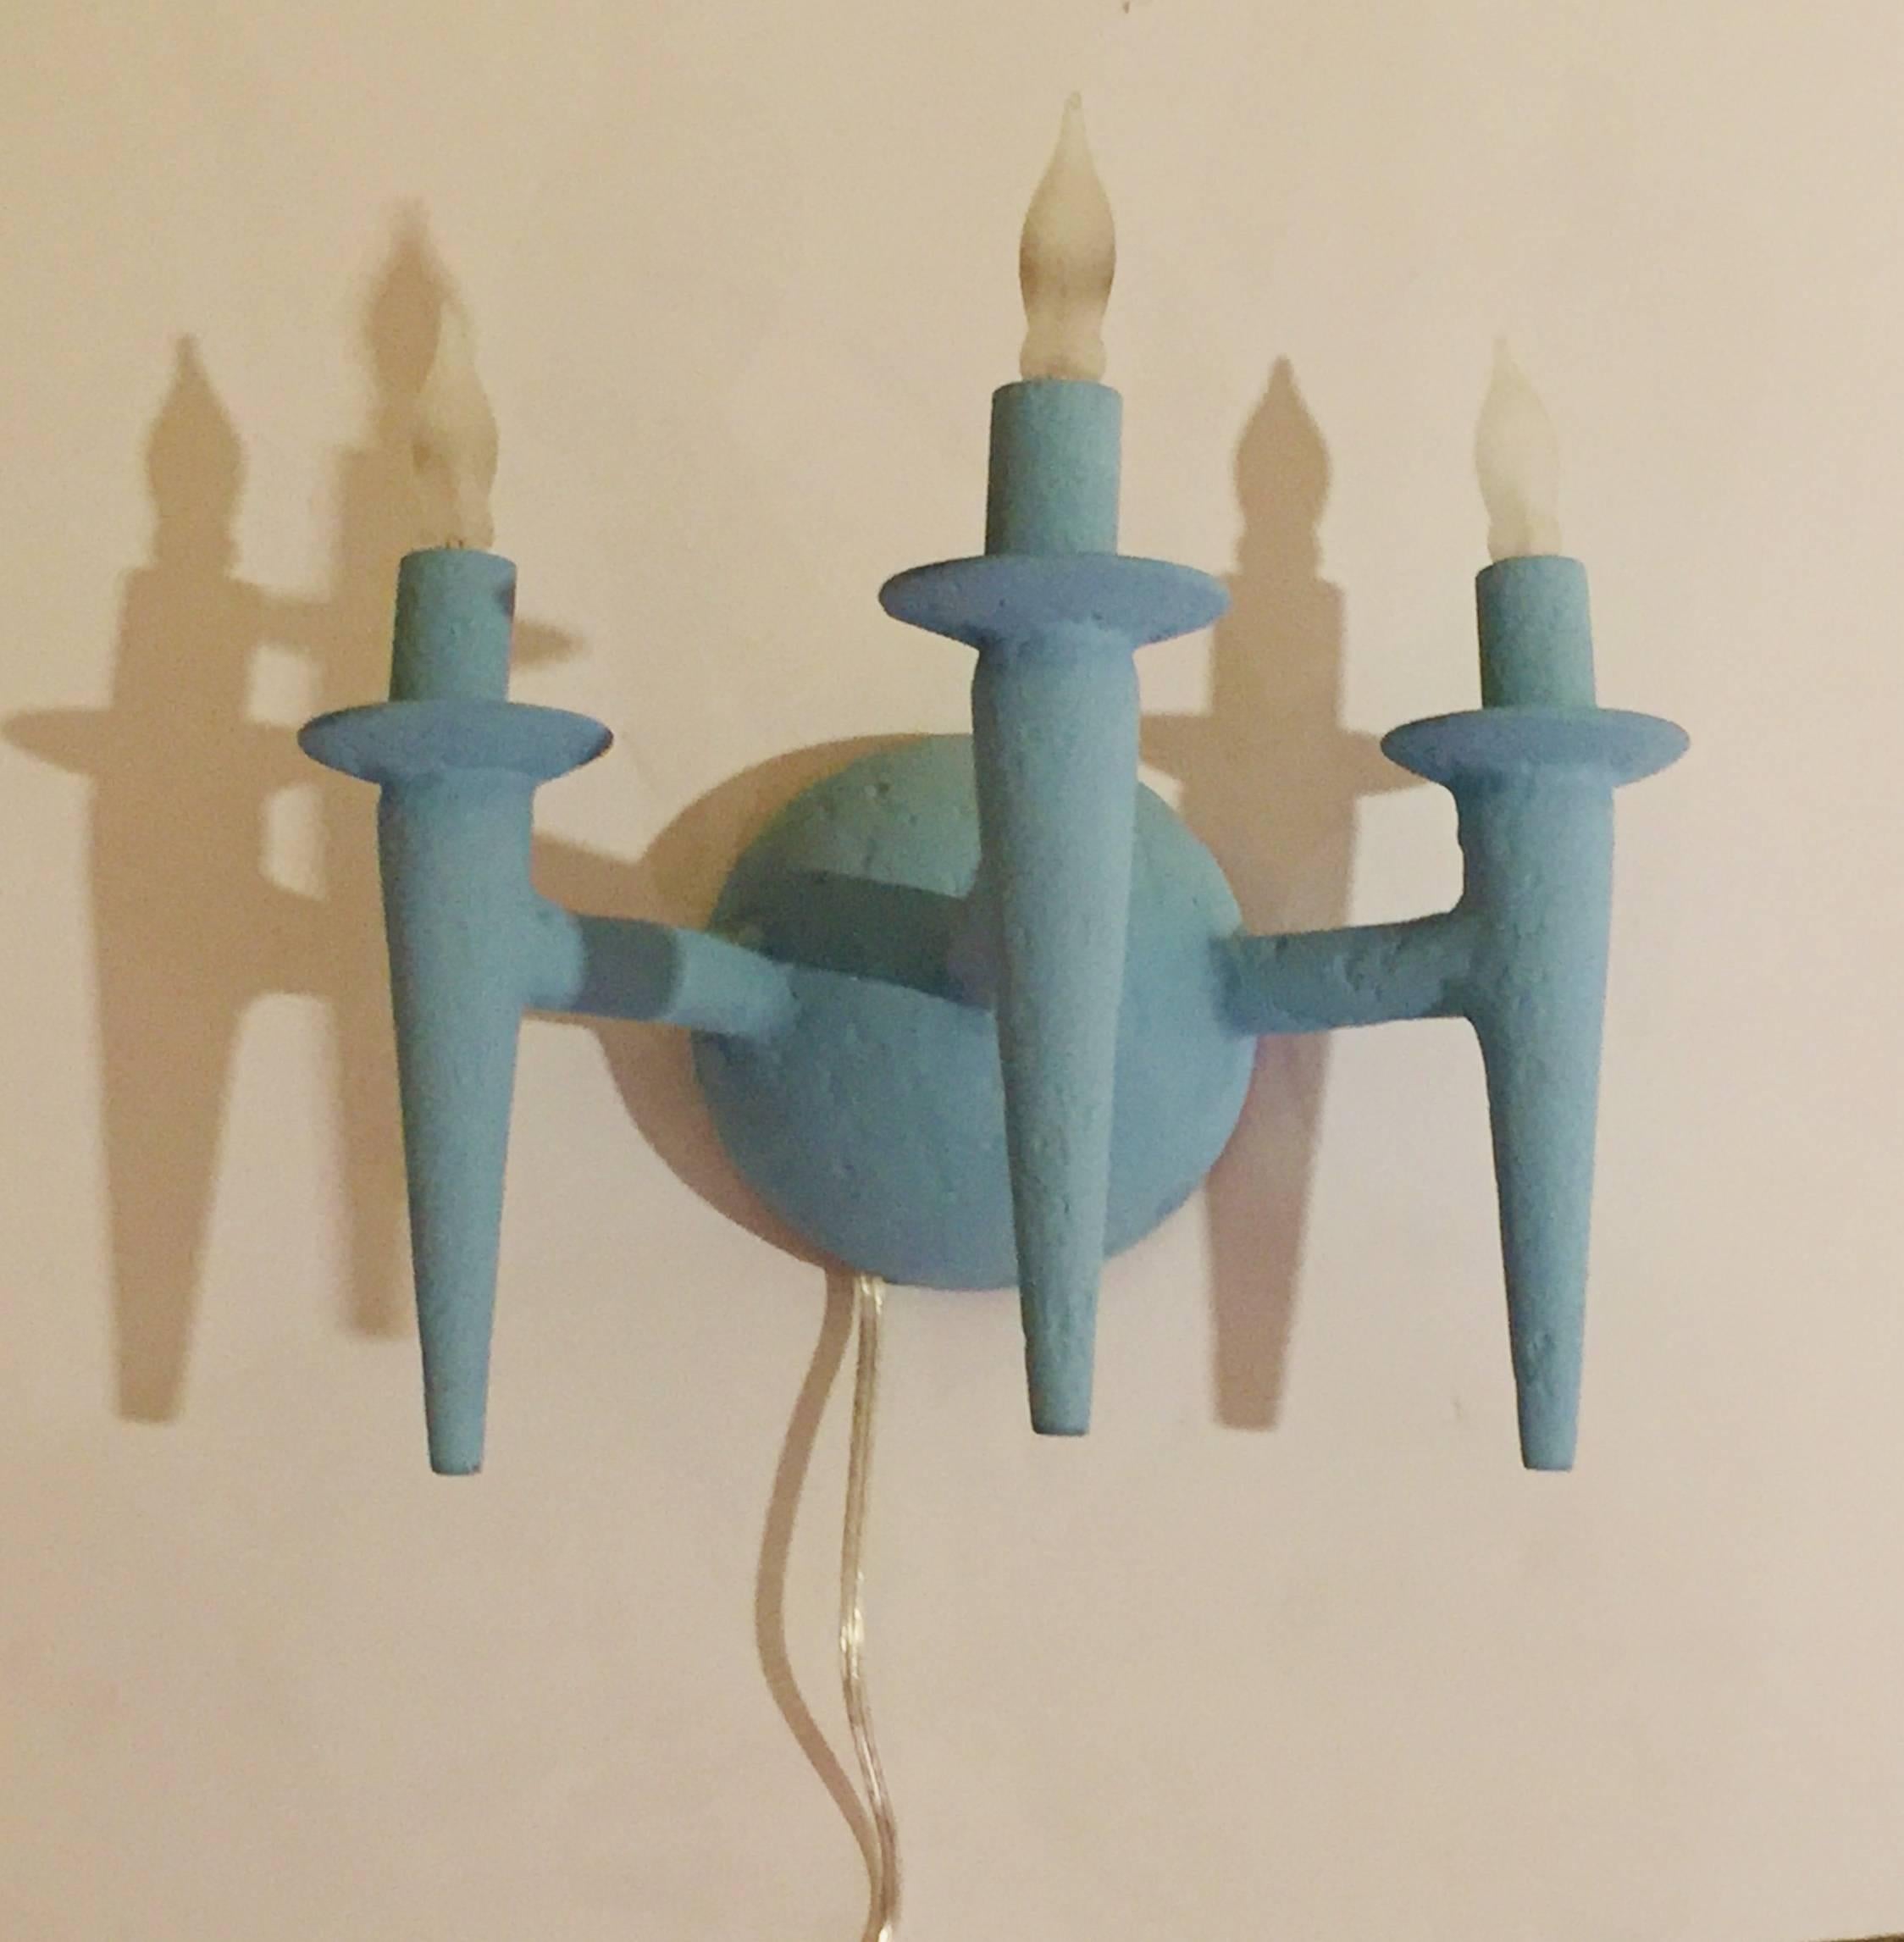 Two wall sconce with plaster finish. Fixture uses three candelabra based bulbs, Max wattage 60 each. Lights fits on a standard J box. The sconces have been painted with Benjamin Moore Marlborough blue paint. Custom sconces can have custom paint